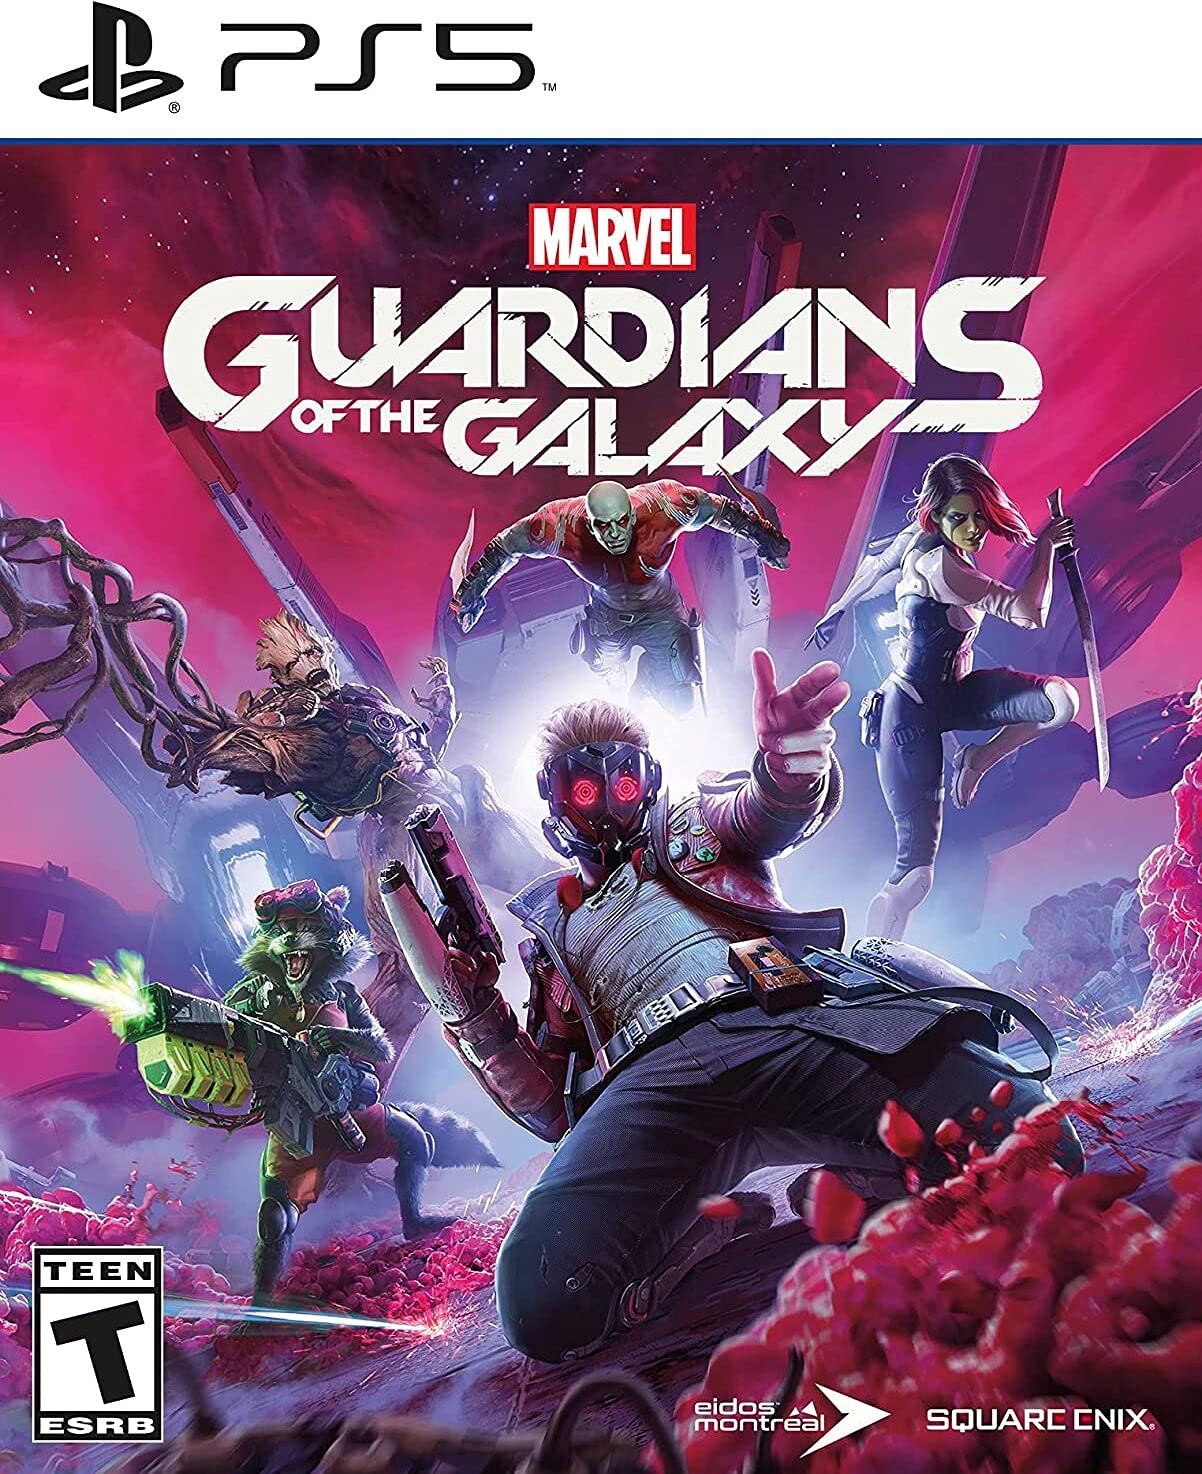 Guardians of the Galaxy by Marvel Video Game for Playstation 5 (PS5)